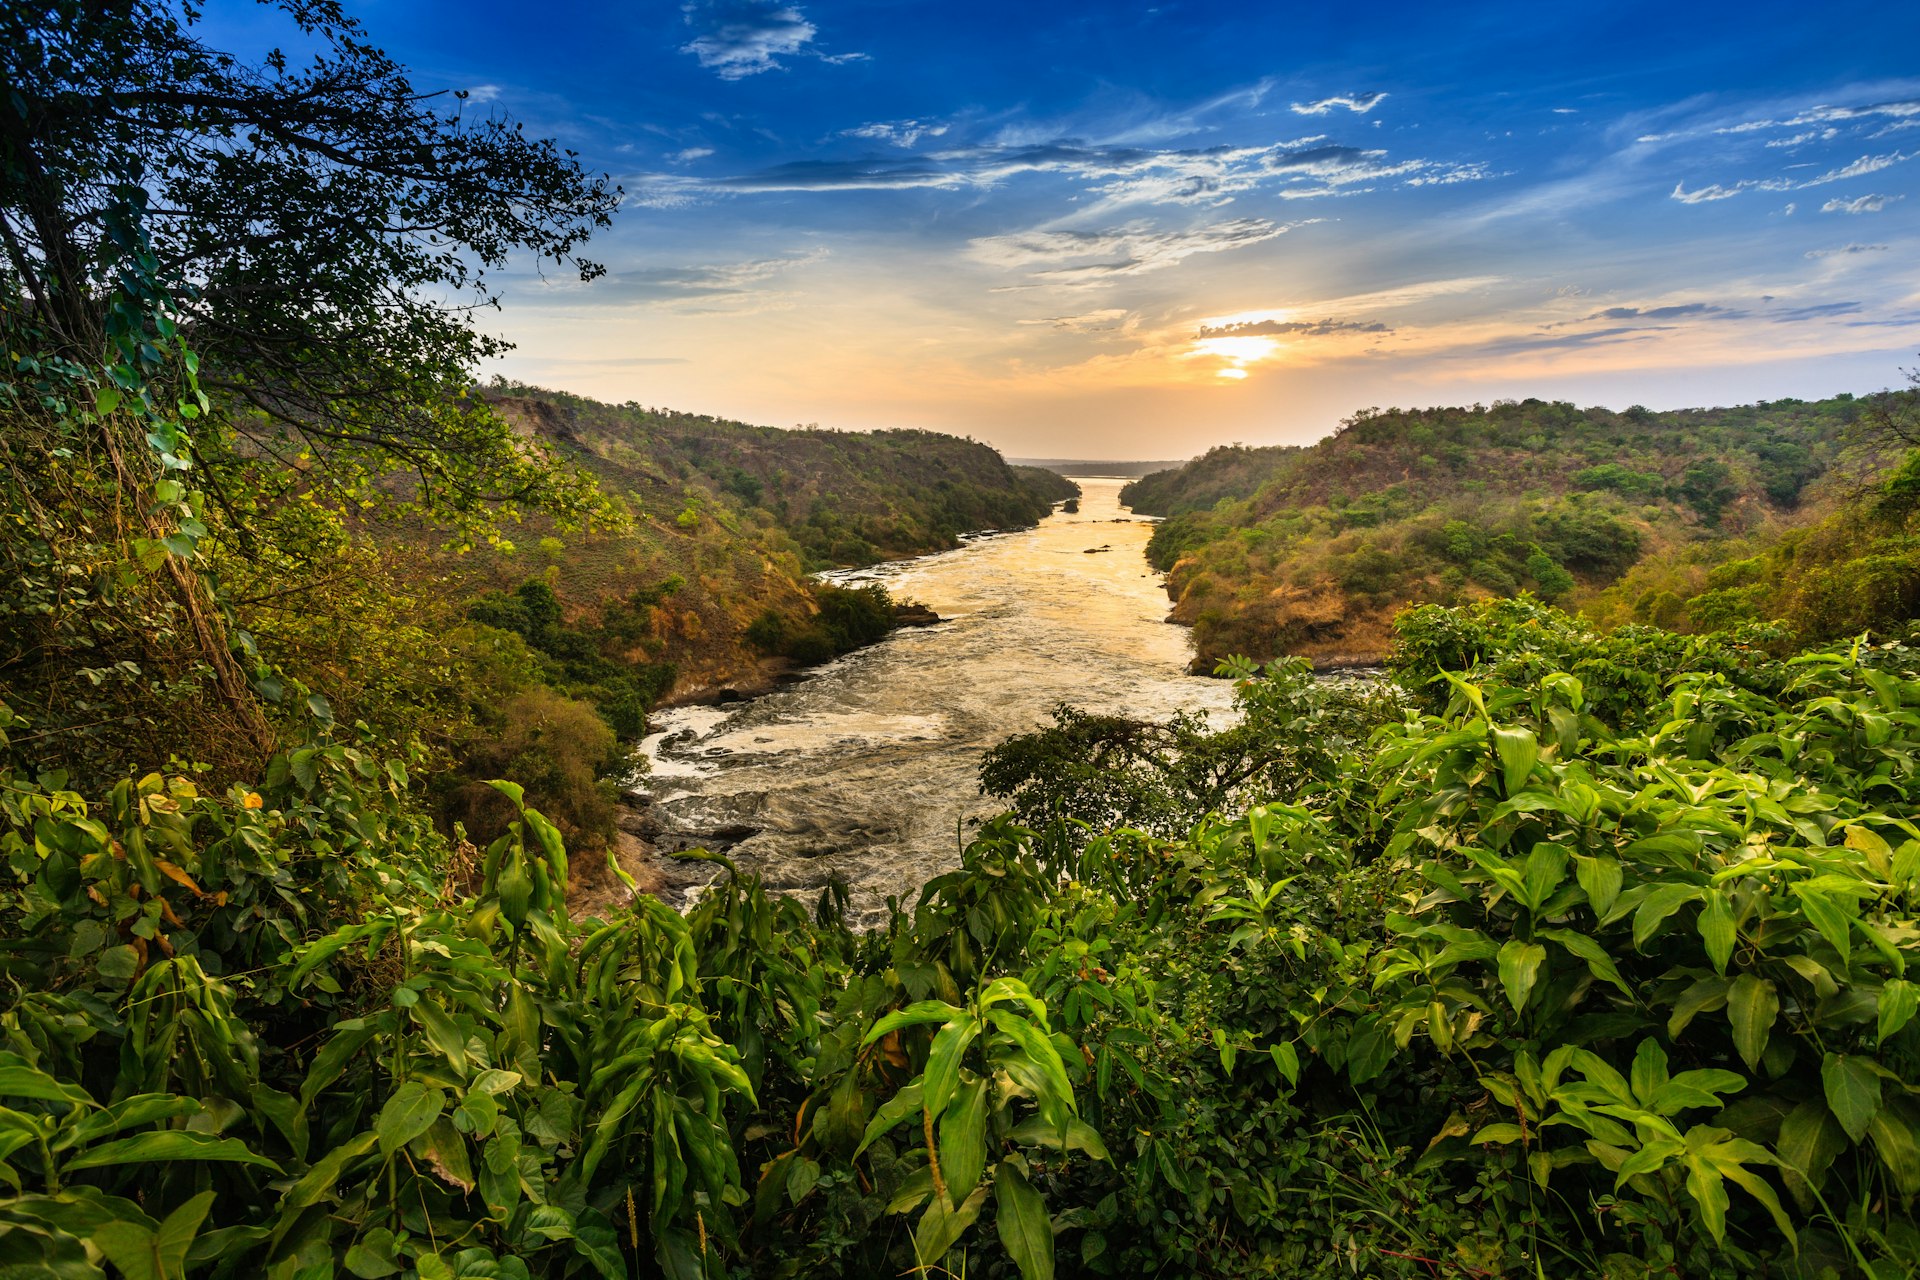 Nile river flowing through dense forest at the Murchison Falls National Park in Uganda